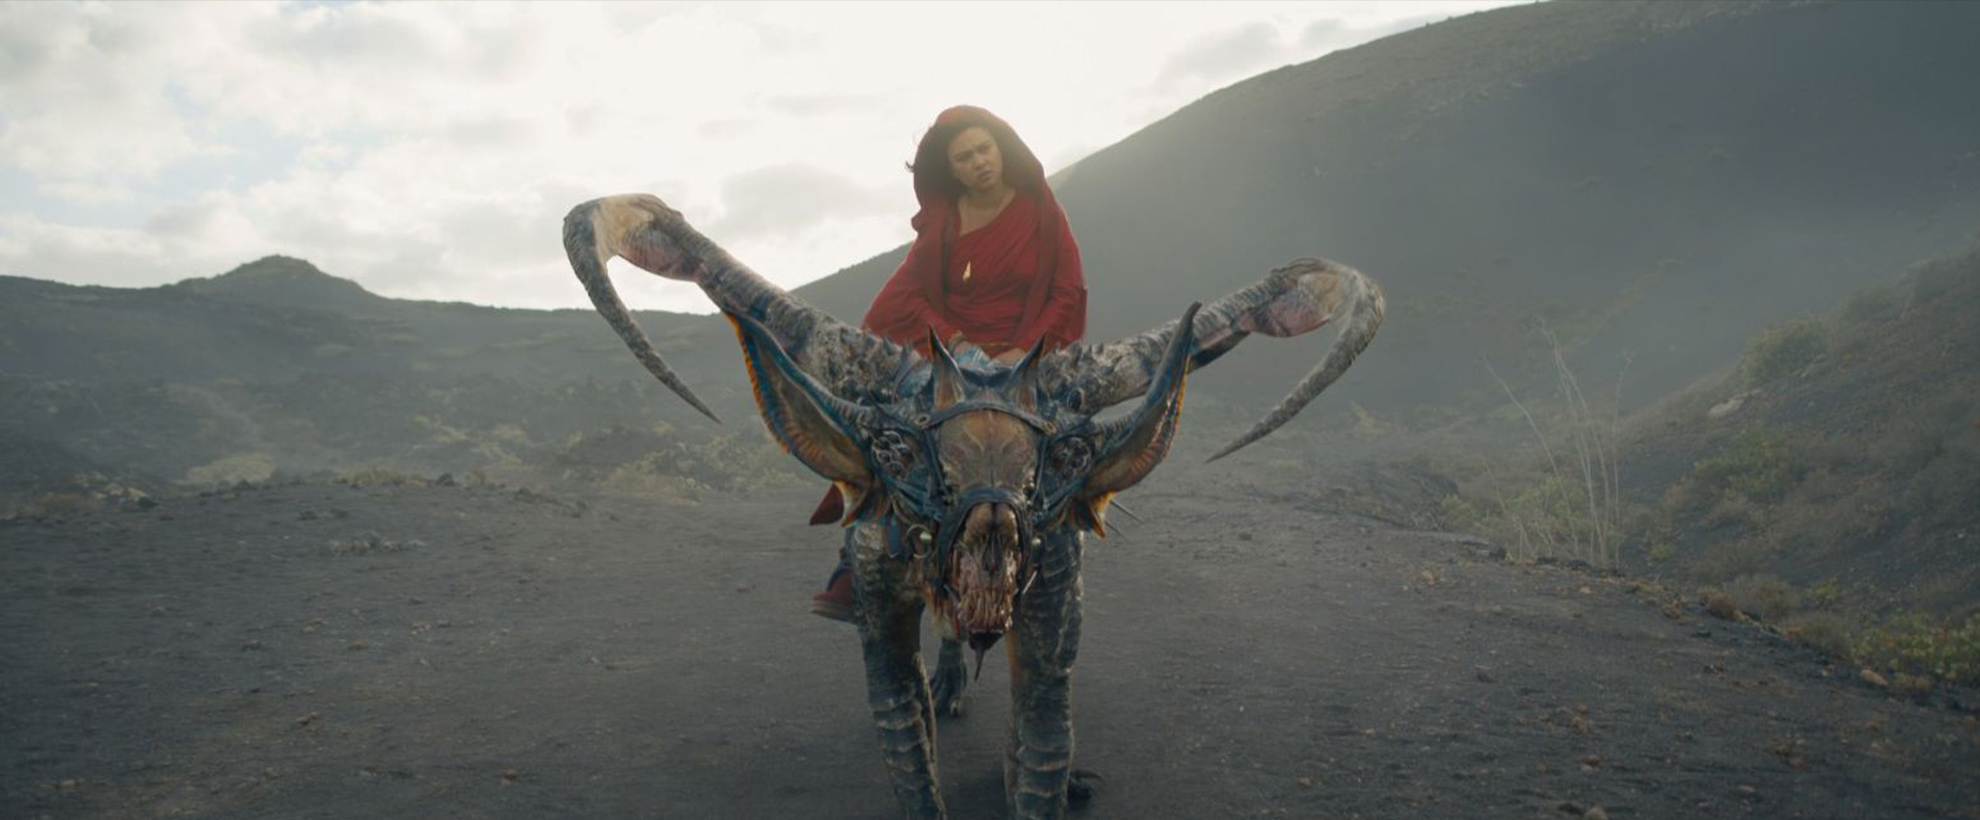 A young woman in a red dress riding an alien creature